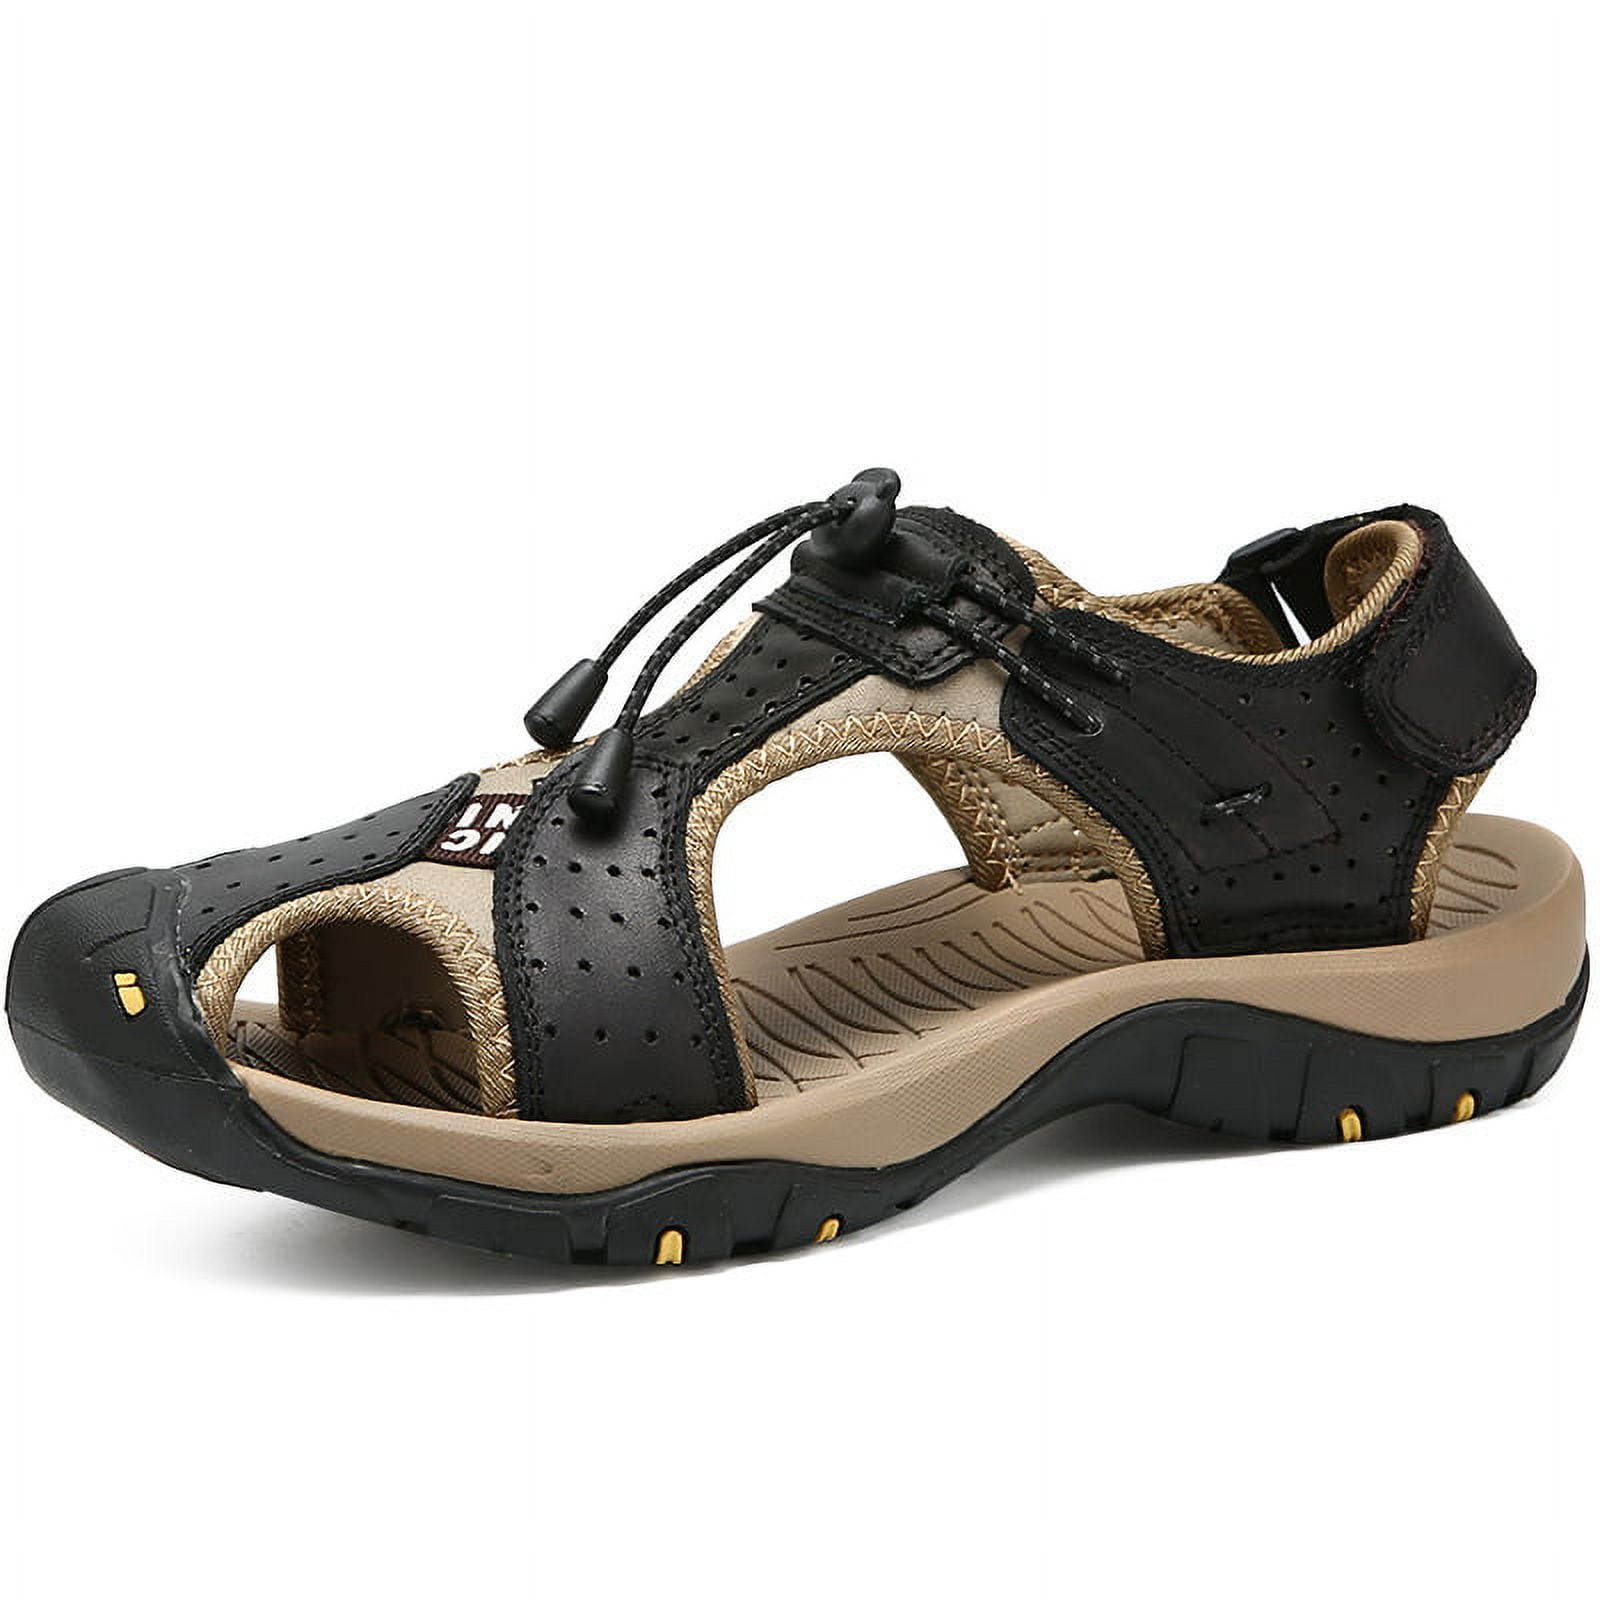 Men's Sandals Hiking Water Beach Sport Outdoor Athletic Arch Support ...